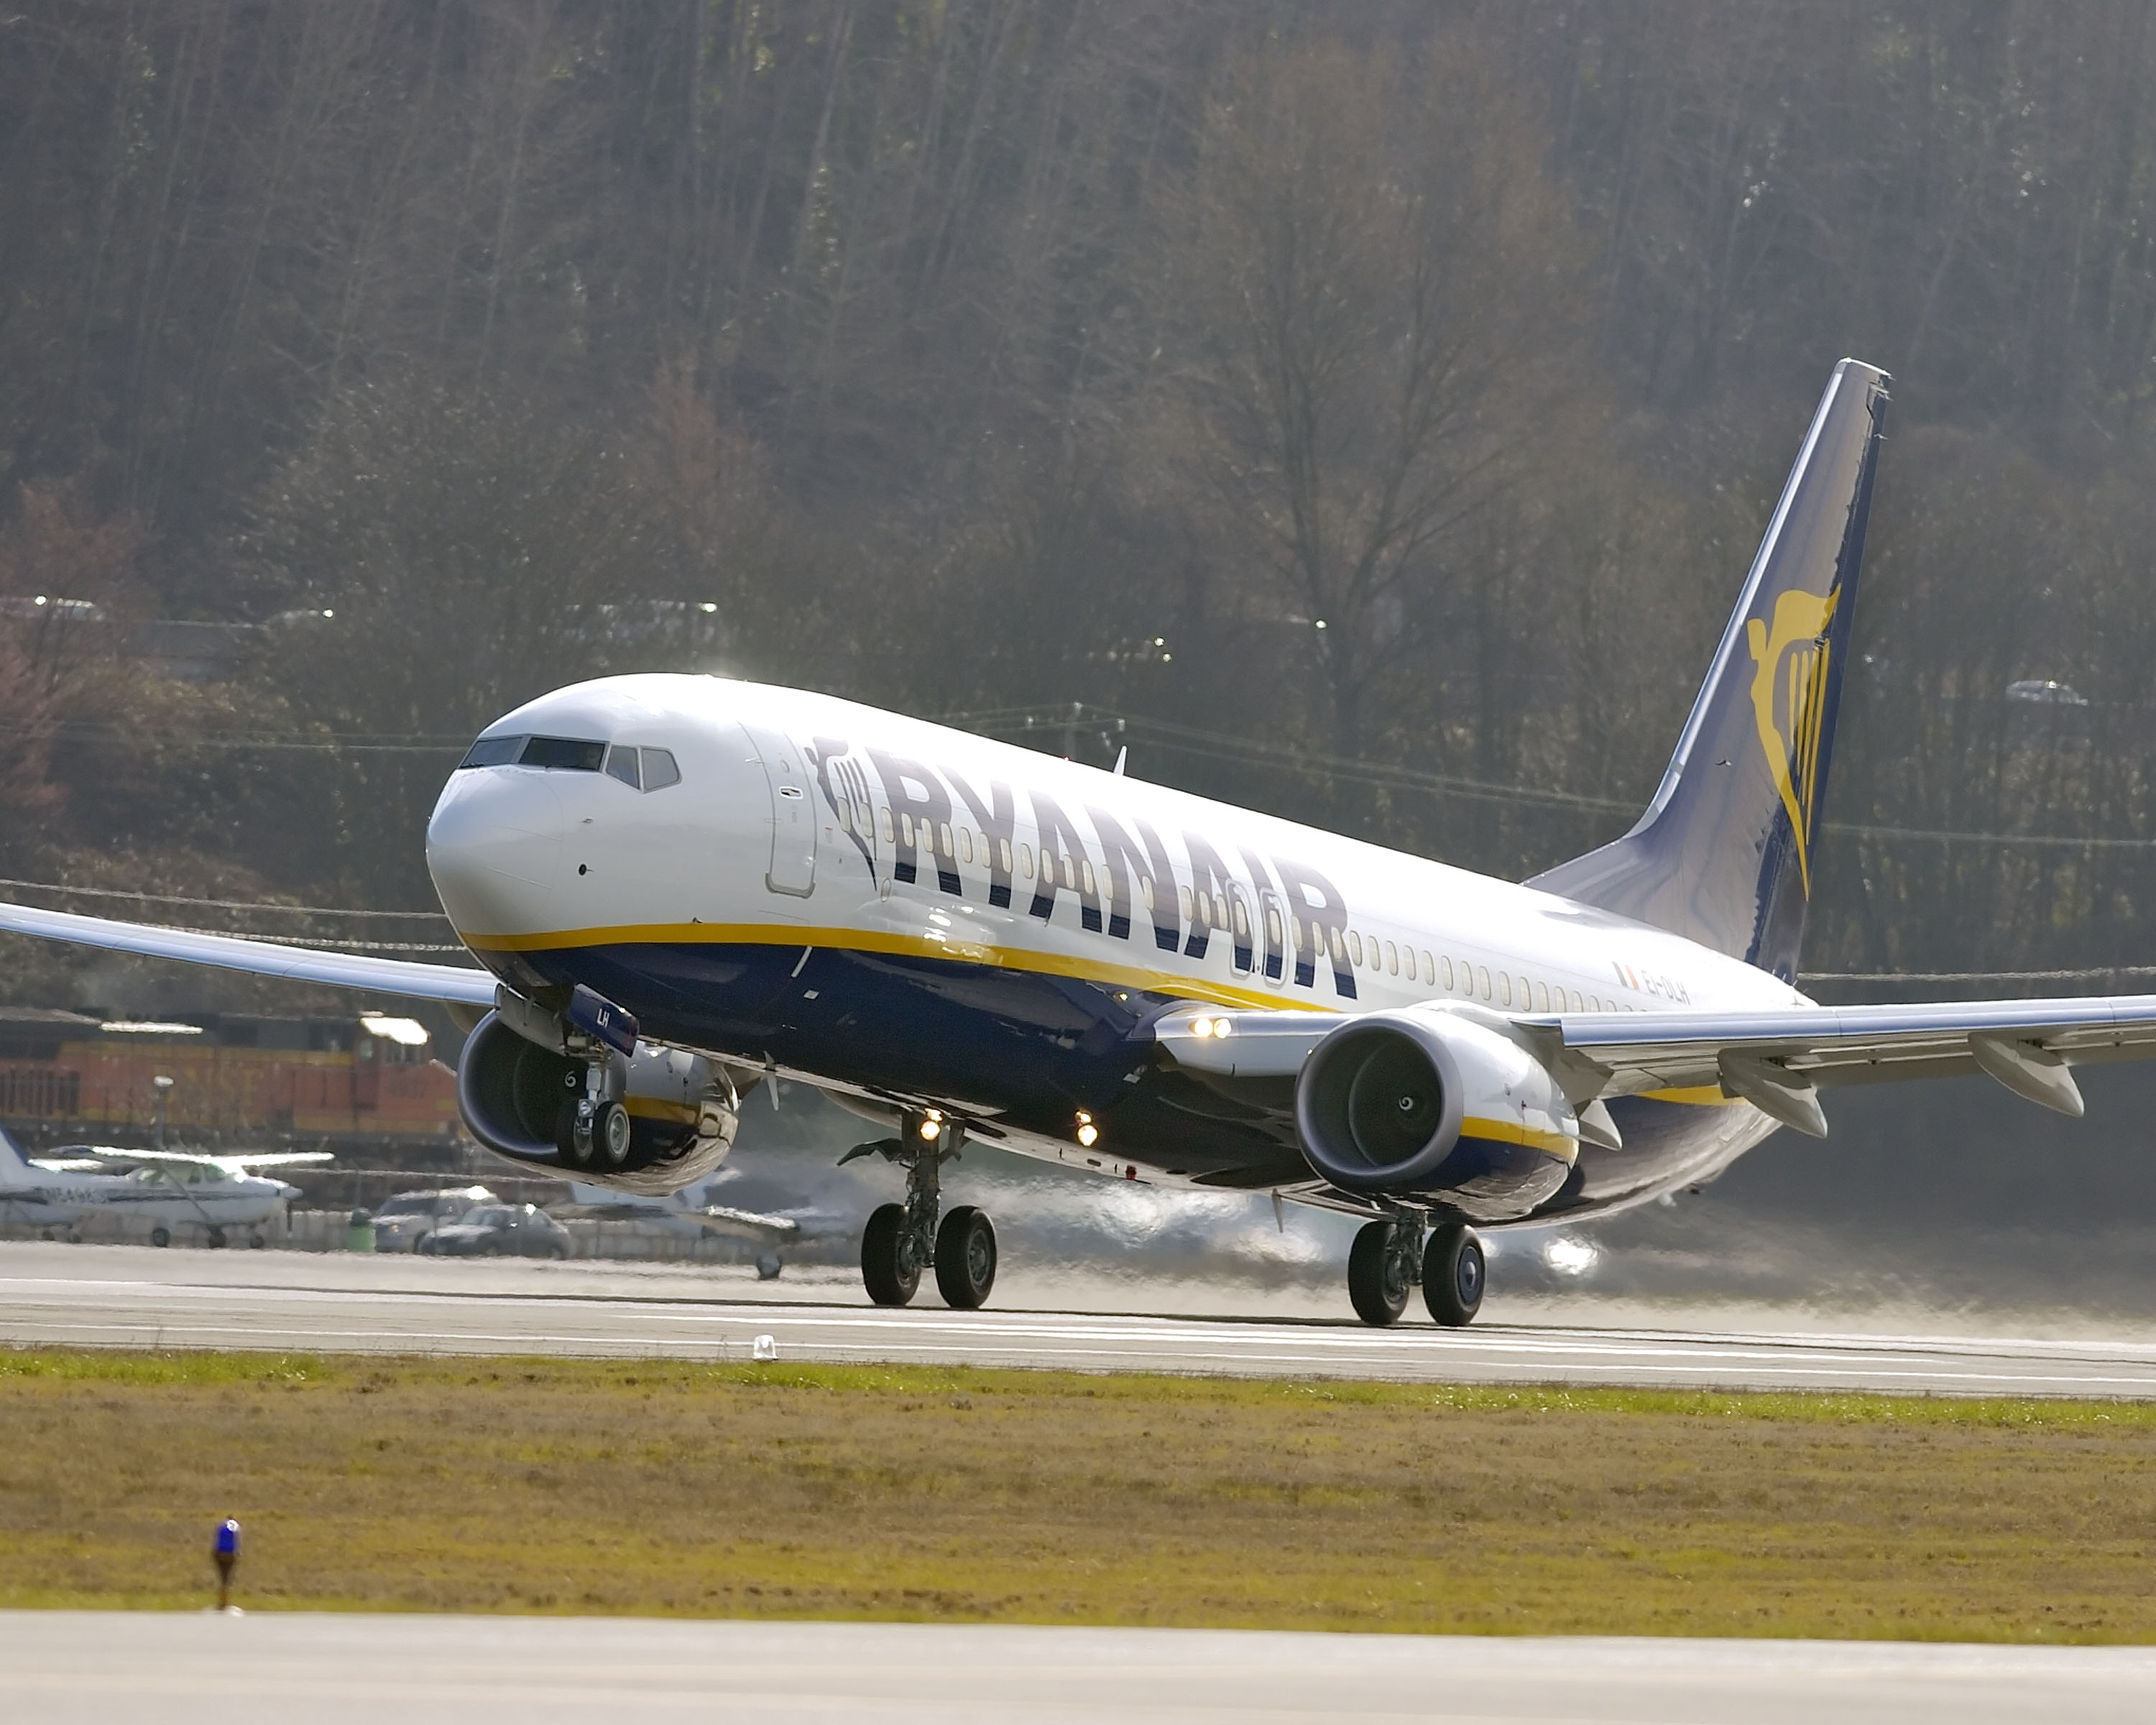 Ryanair Spanish Cabin Crew Vote (99%) For Recognition Agreement